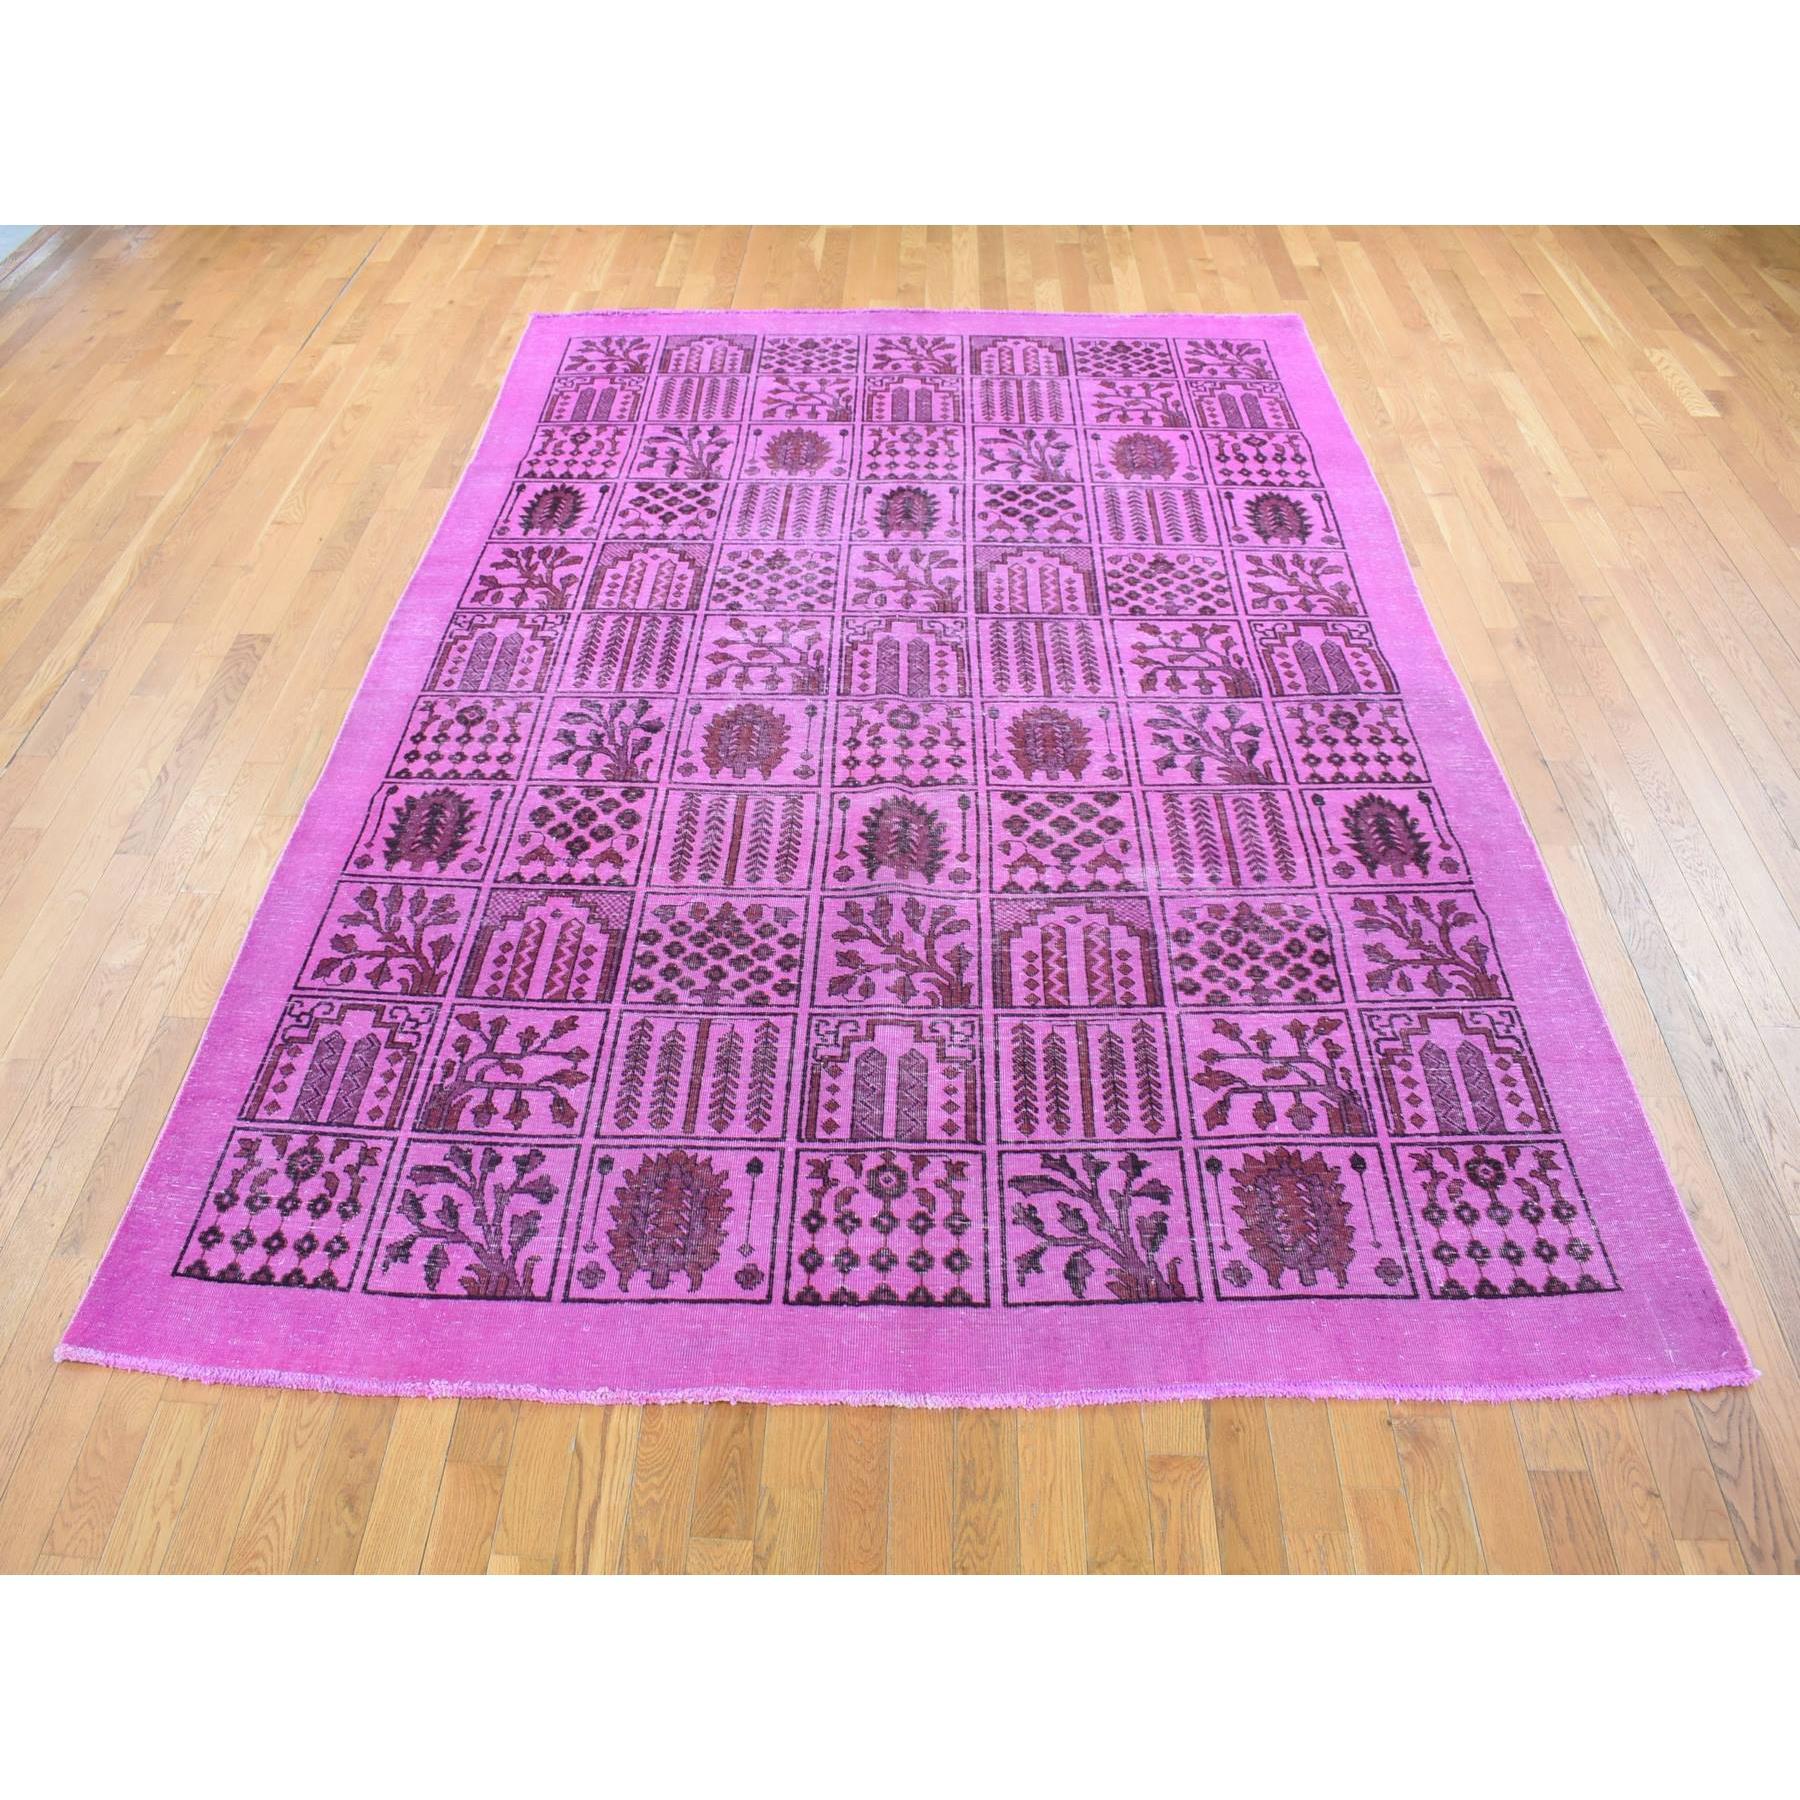 This fabulous Hand-Knotted carpet has been created and designed for extra strength and durability. This rug has been handcrafted for weeks in the traditional method that is used to make
Exact Rug Size in Feet and Inches : 7'8